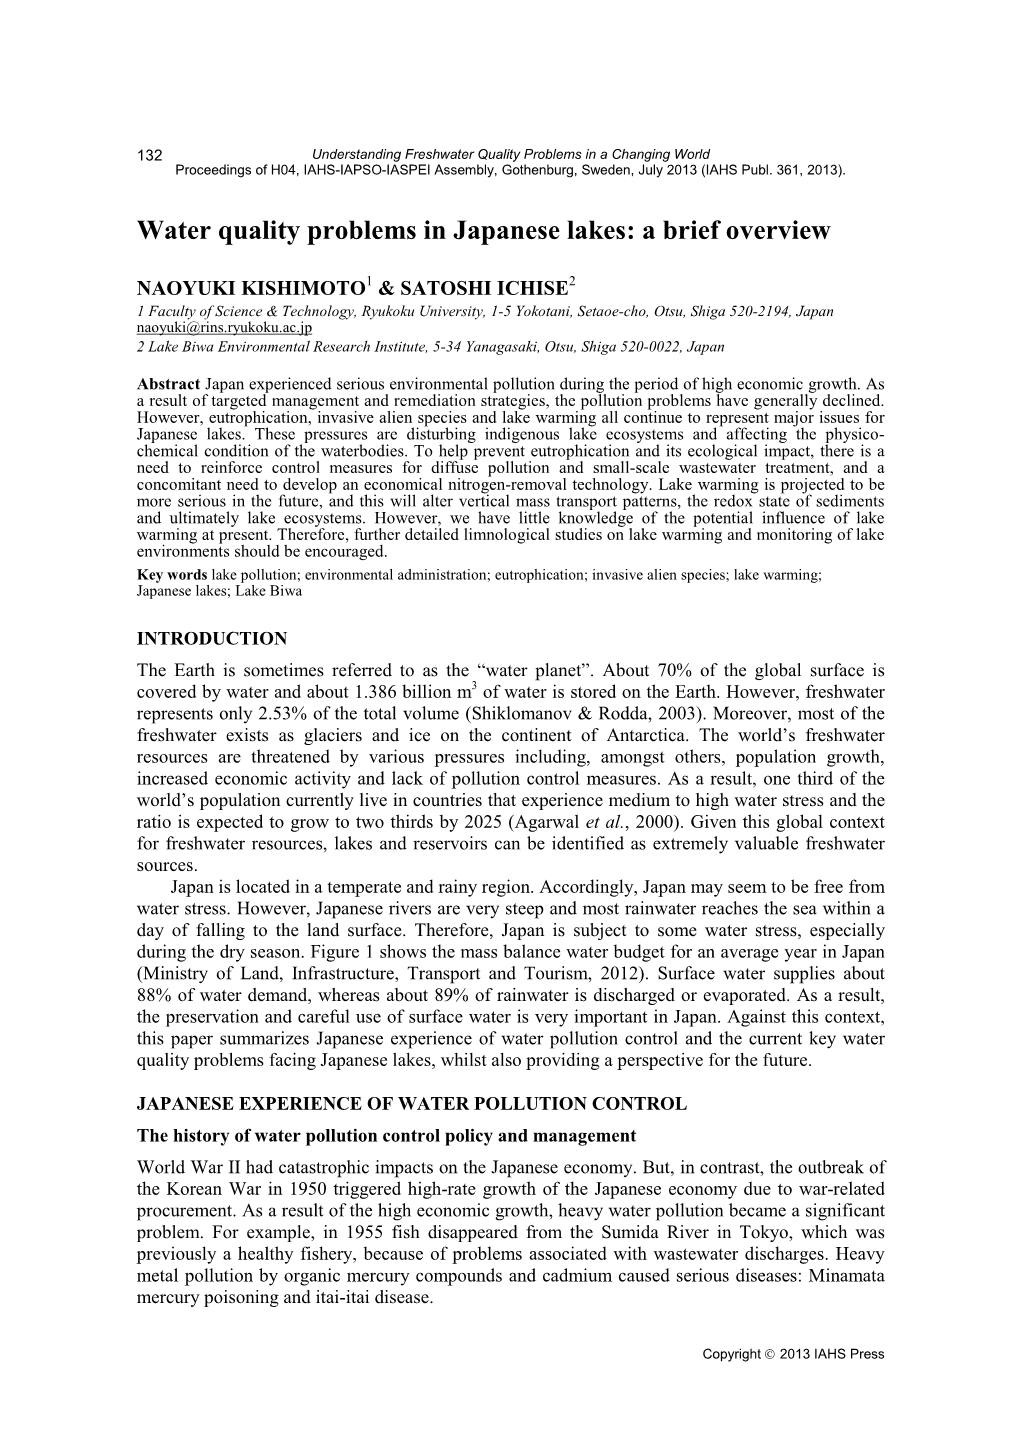 Water Quality Problems in Japanese Lakes: a Brief Overview